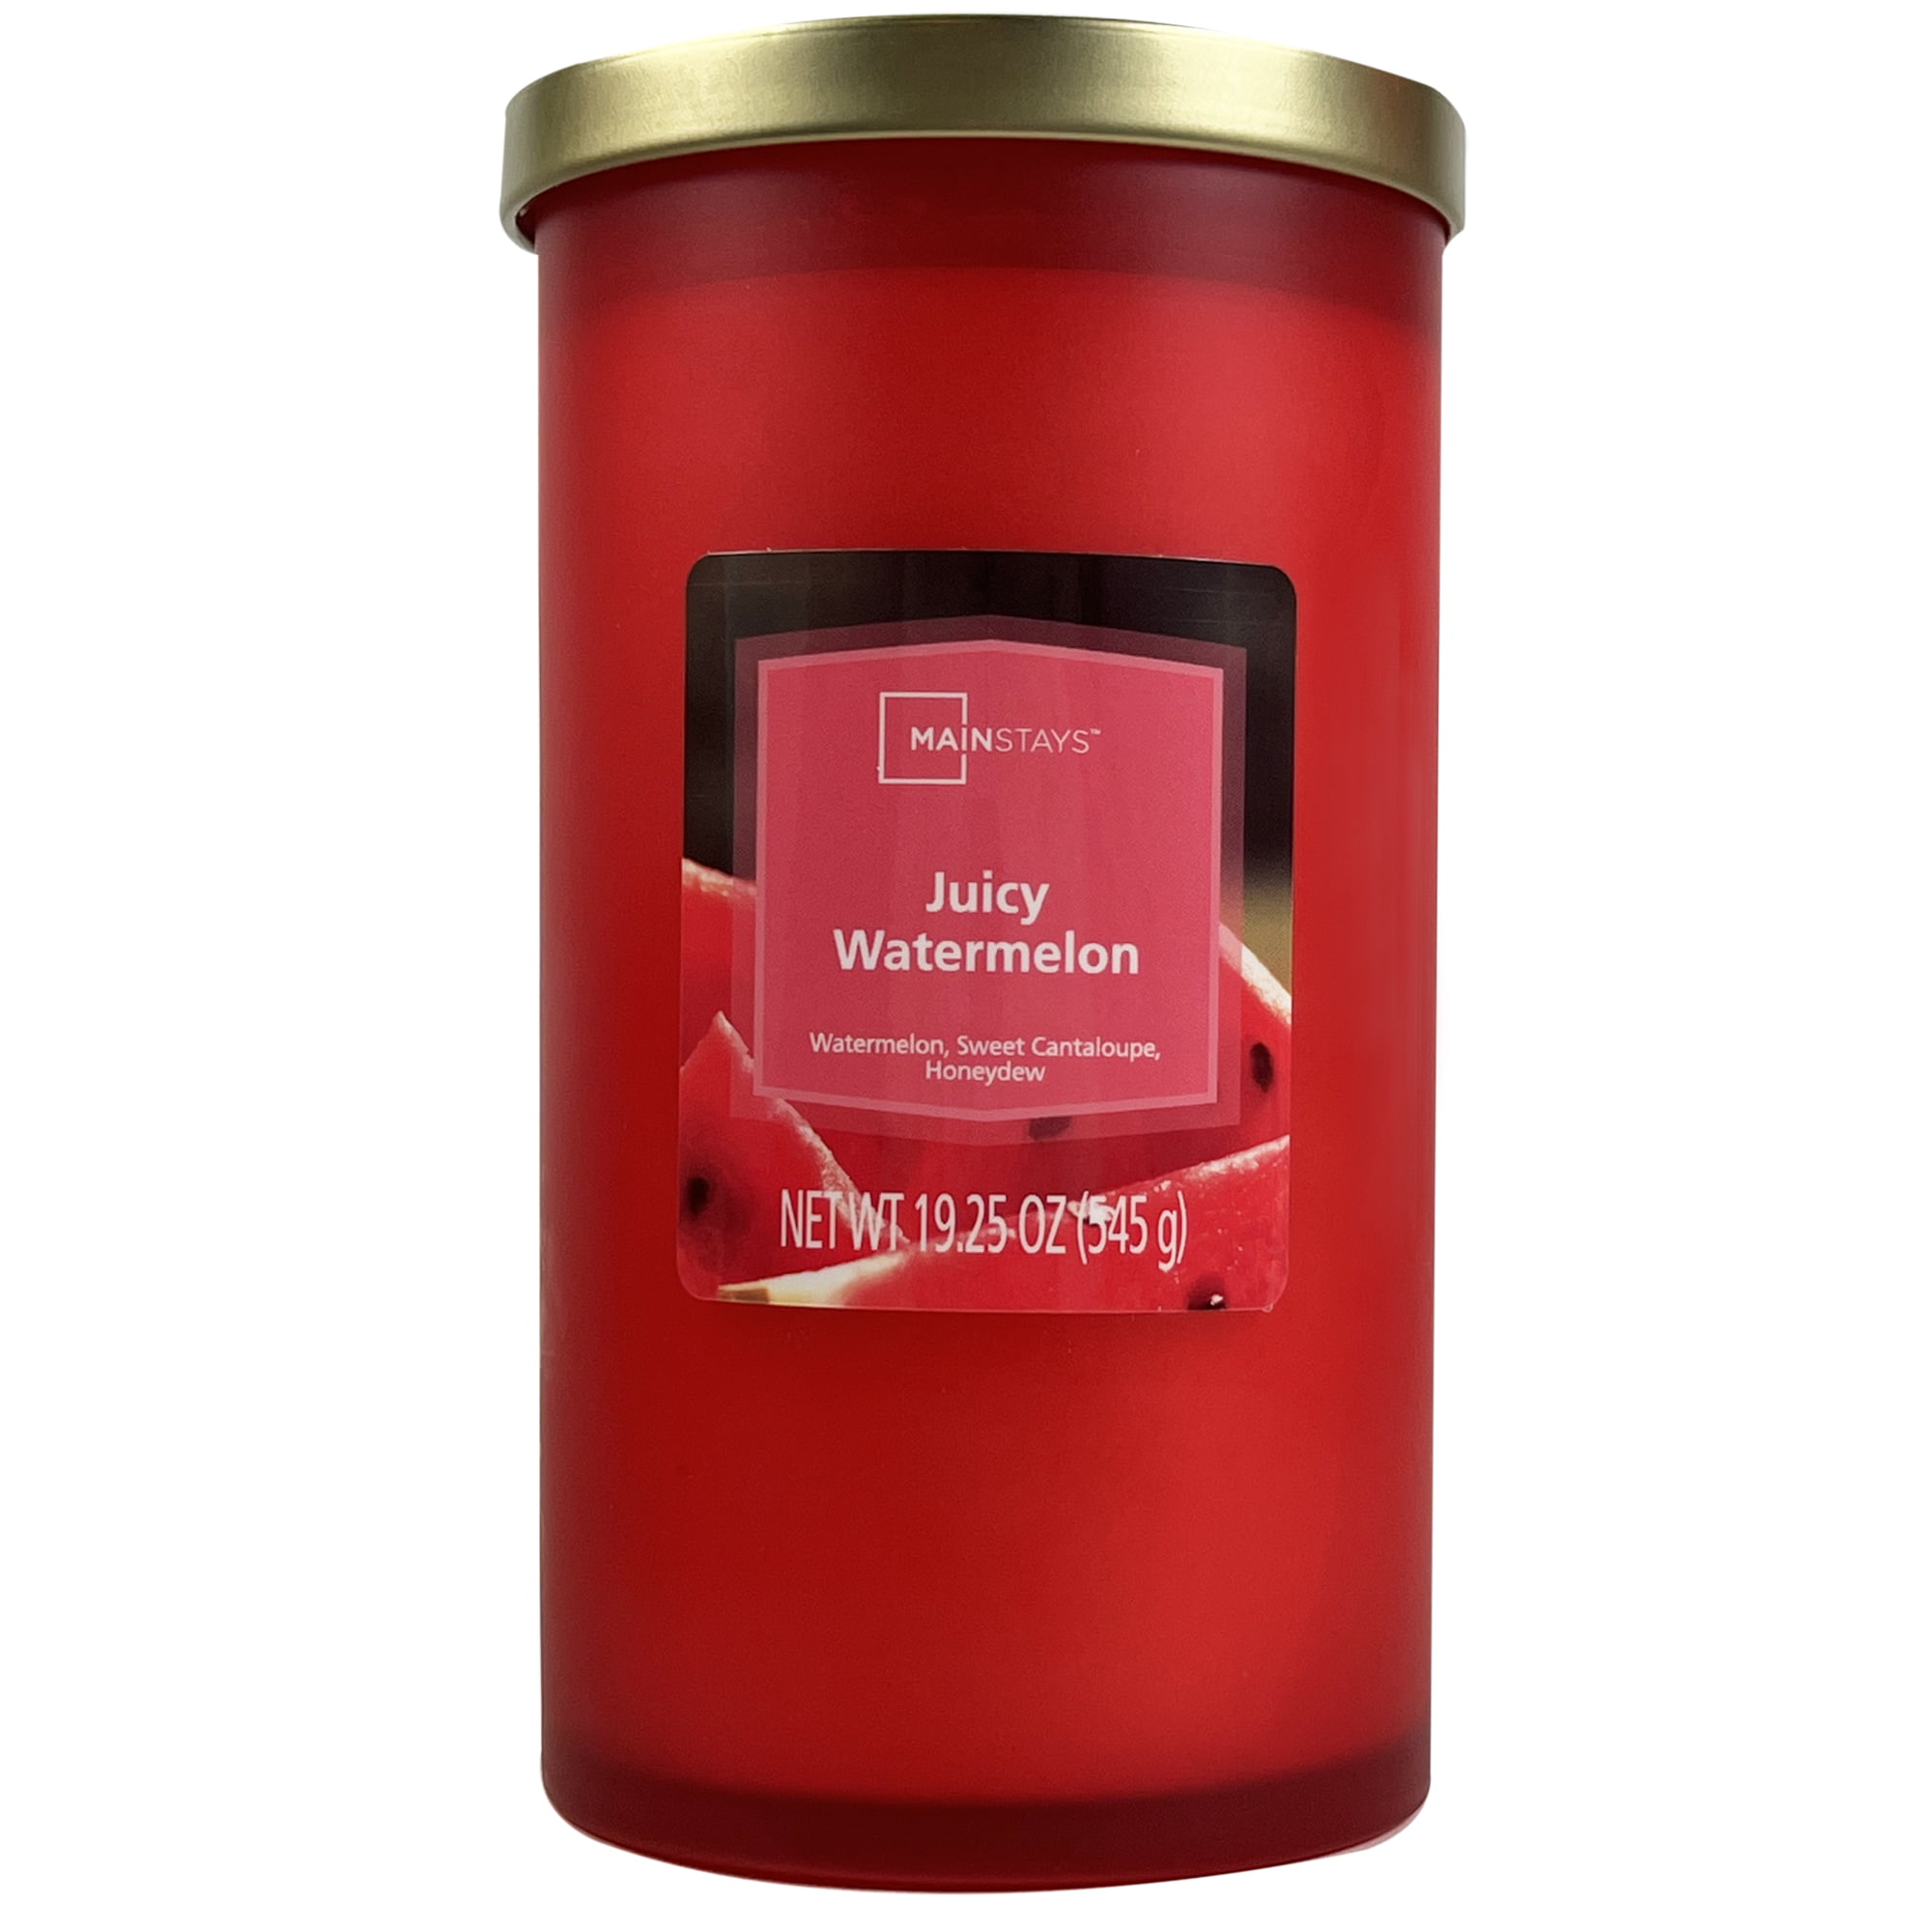 Juicy Watermelon Candle Set, 2-Pack